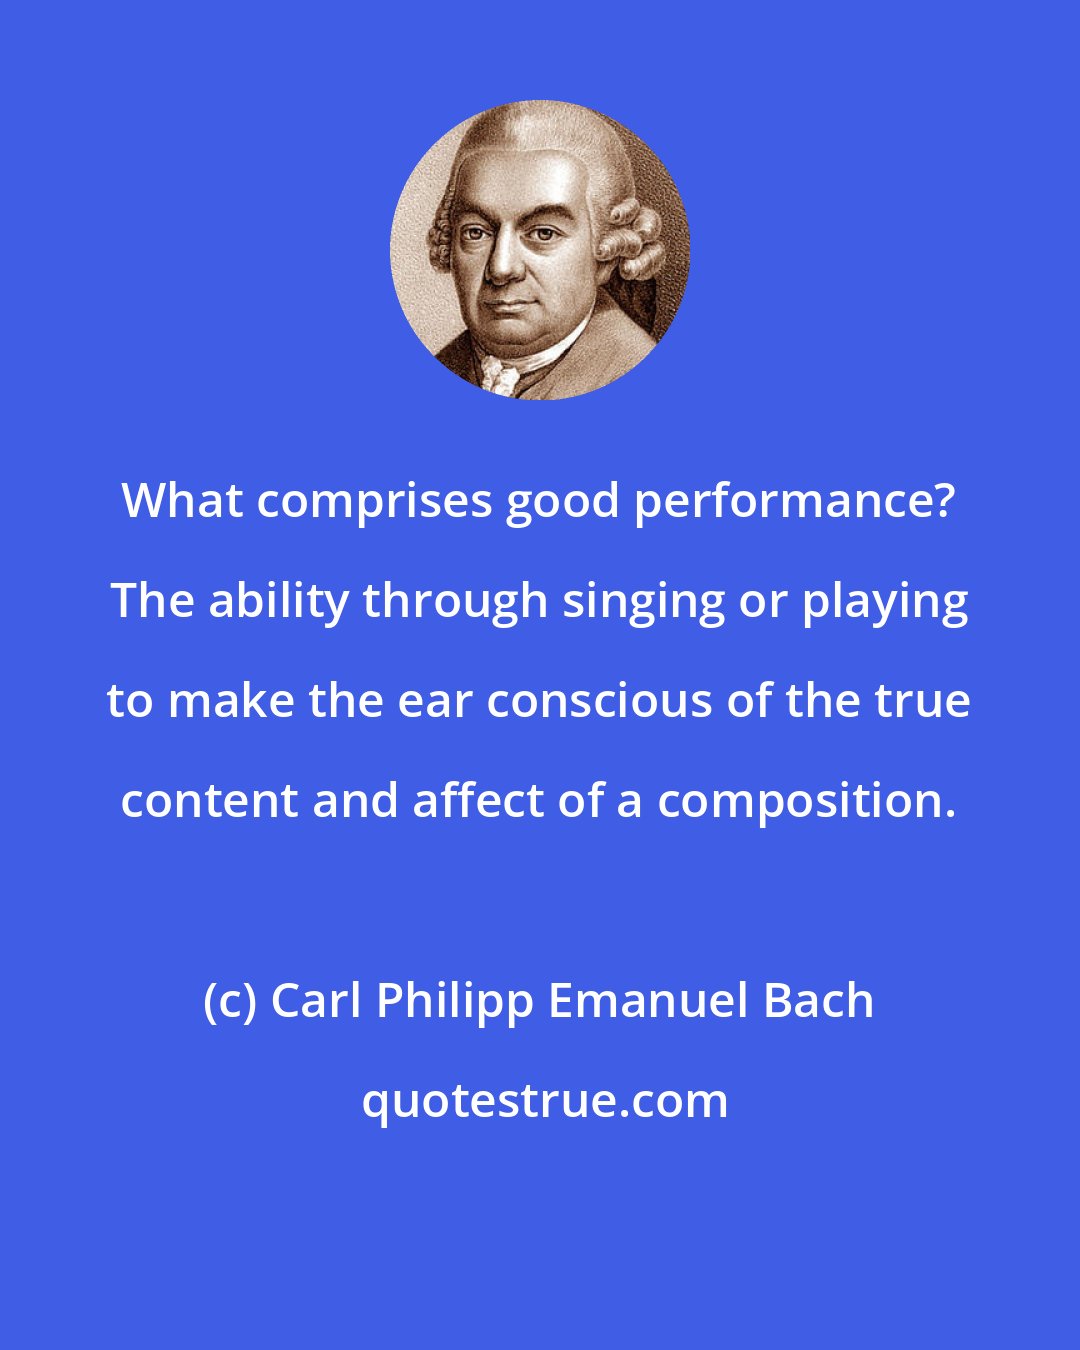 Carl Philipp Emanuel Bach: What comprises good performance? The ability through singing or playing to make the ear conscious of the true content and affect of a composition.